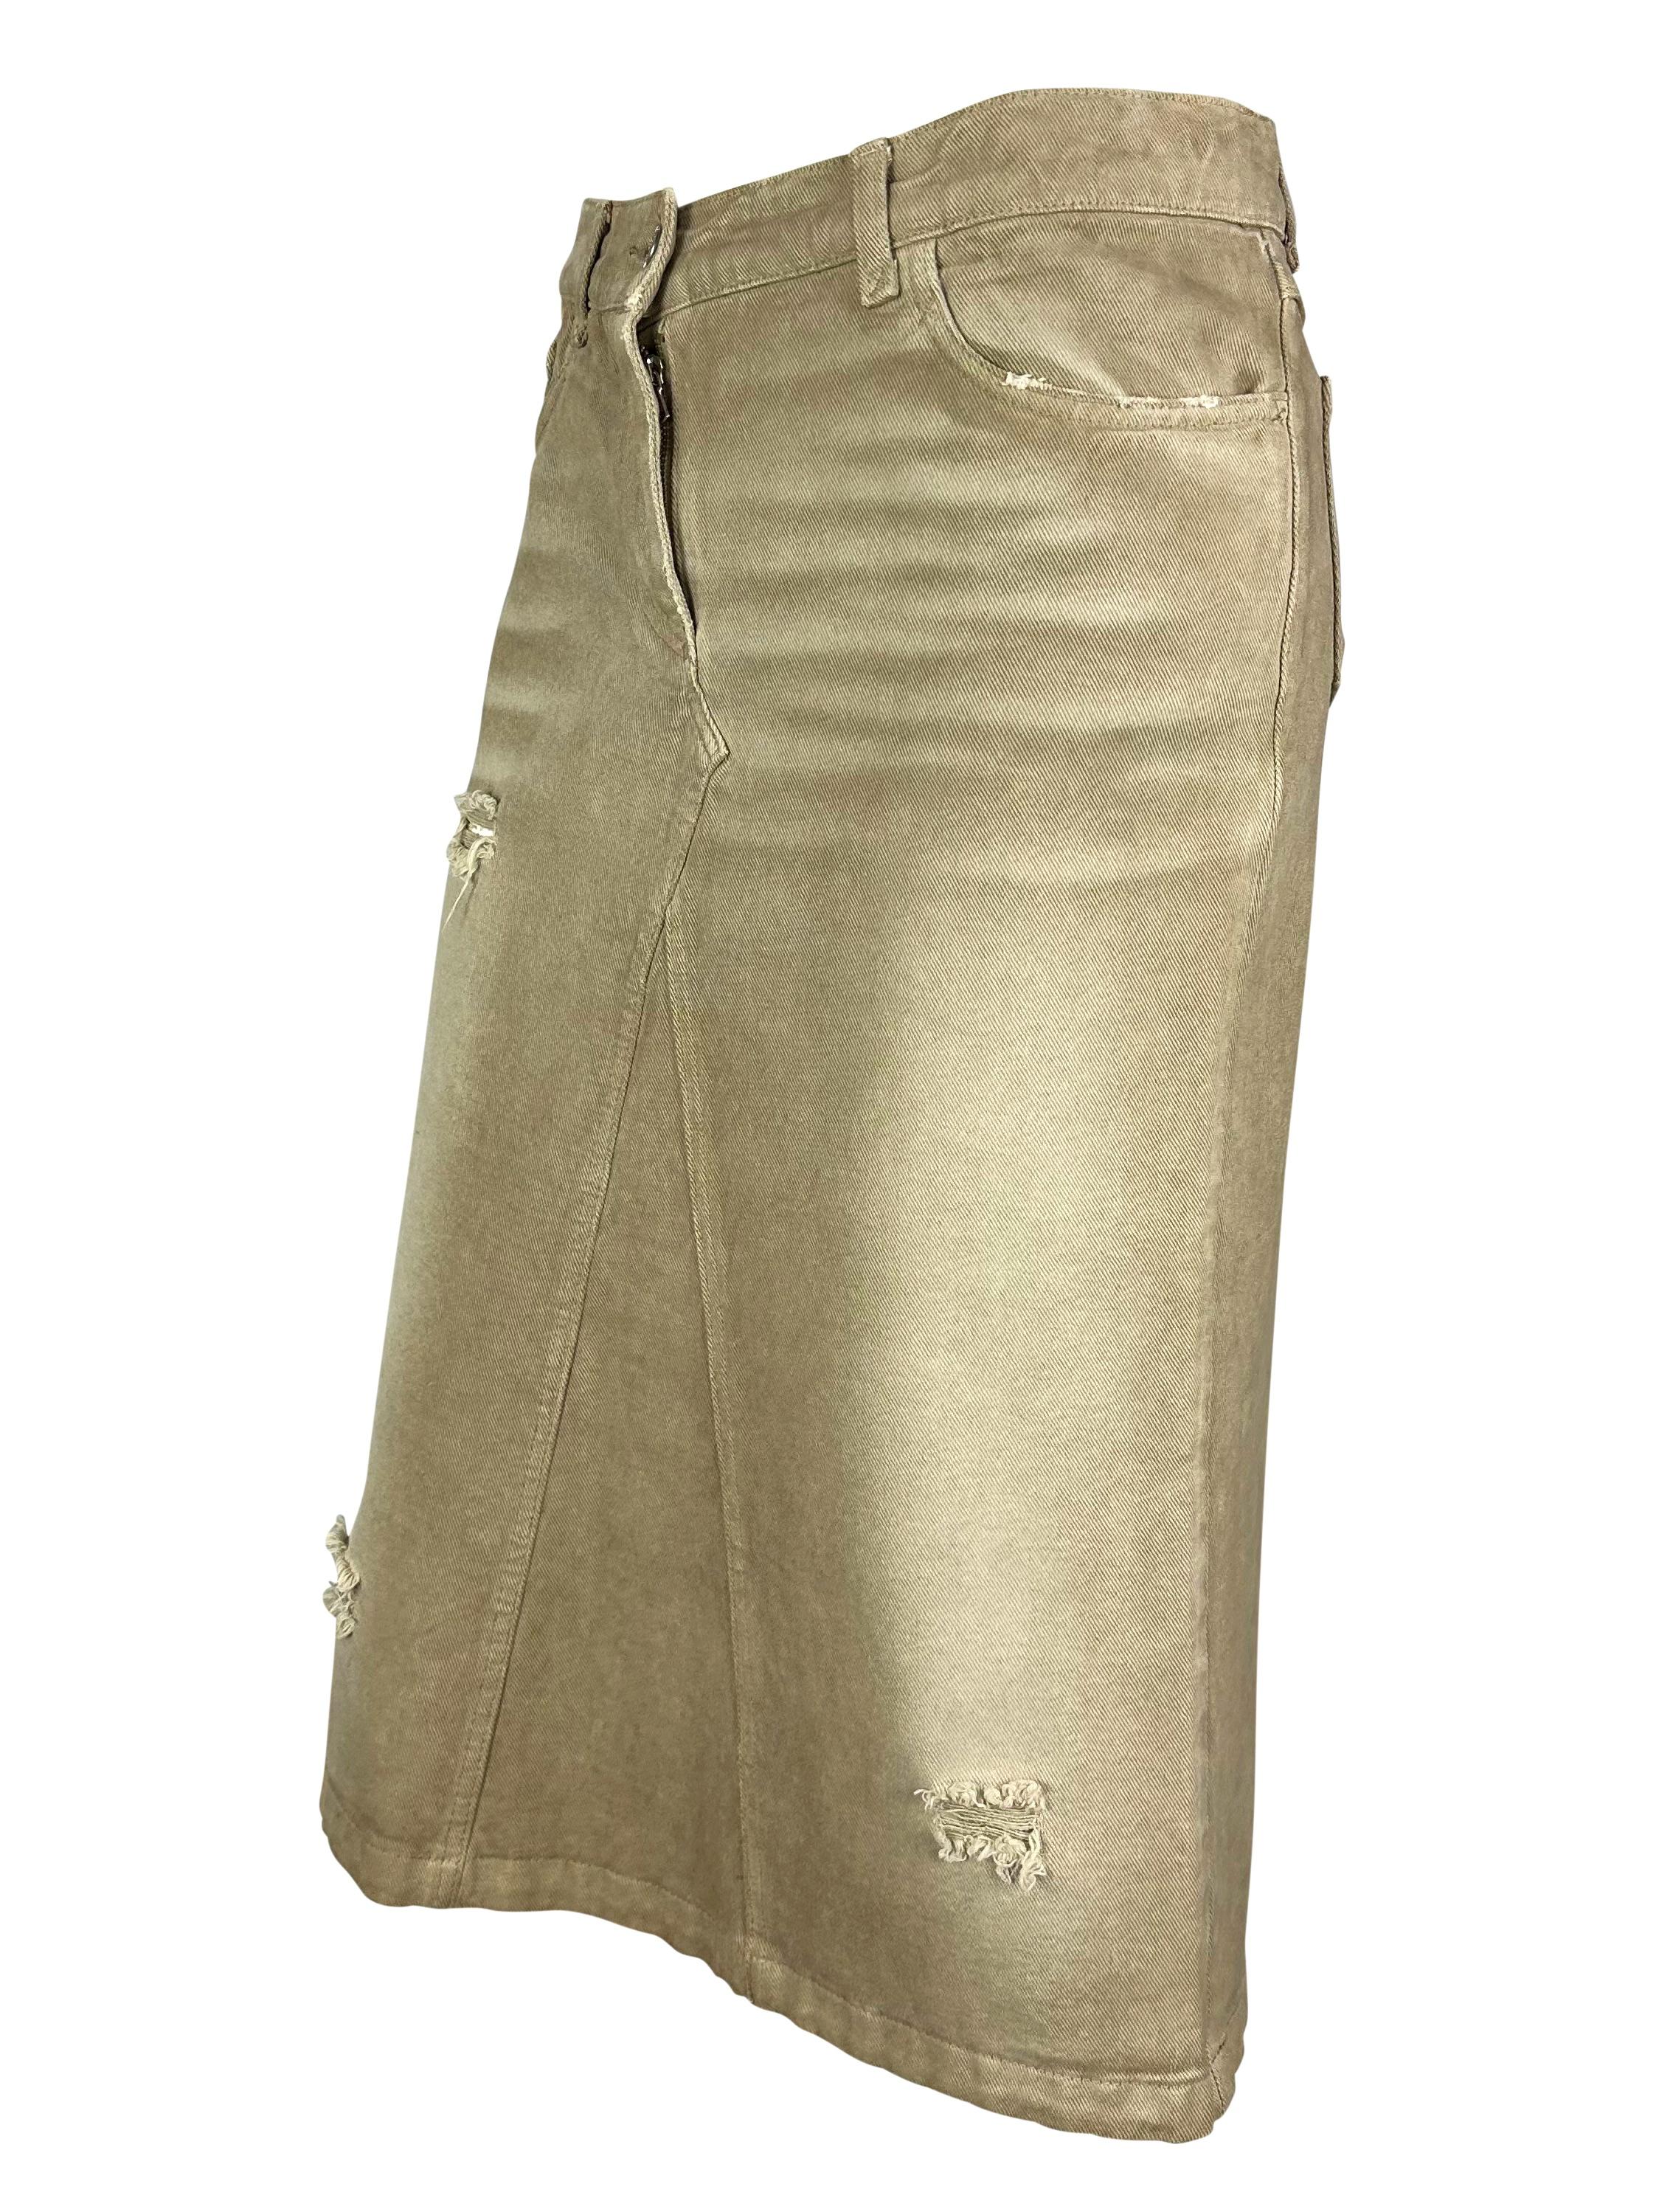 Presenting a fabulous beige distressed denim Dolce and Gabbana skirt. From the late 1990s/ early 2000s, this vintage midi skirt is purposefully distressed and is constructed to look like reworked jeans. Add this chic skirt to your wardrobe!